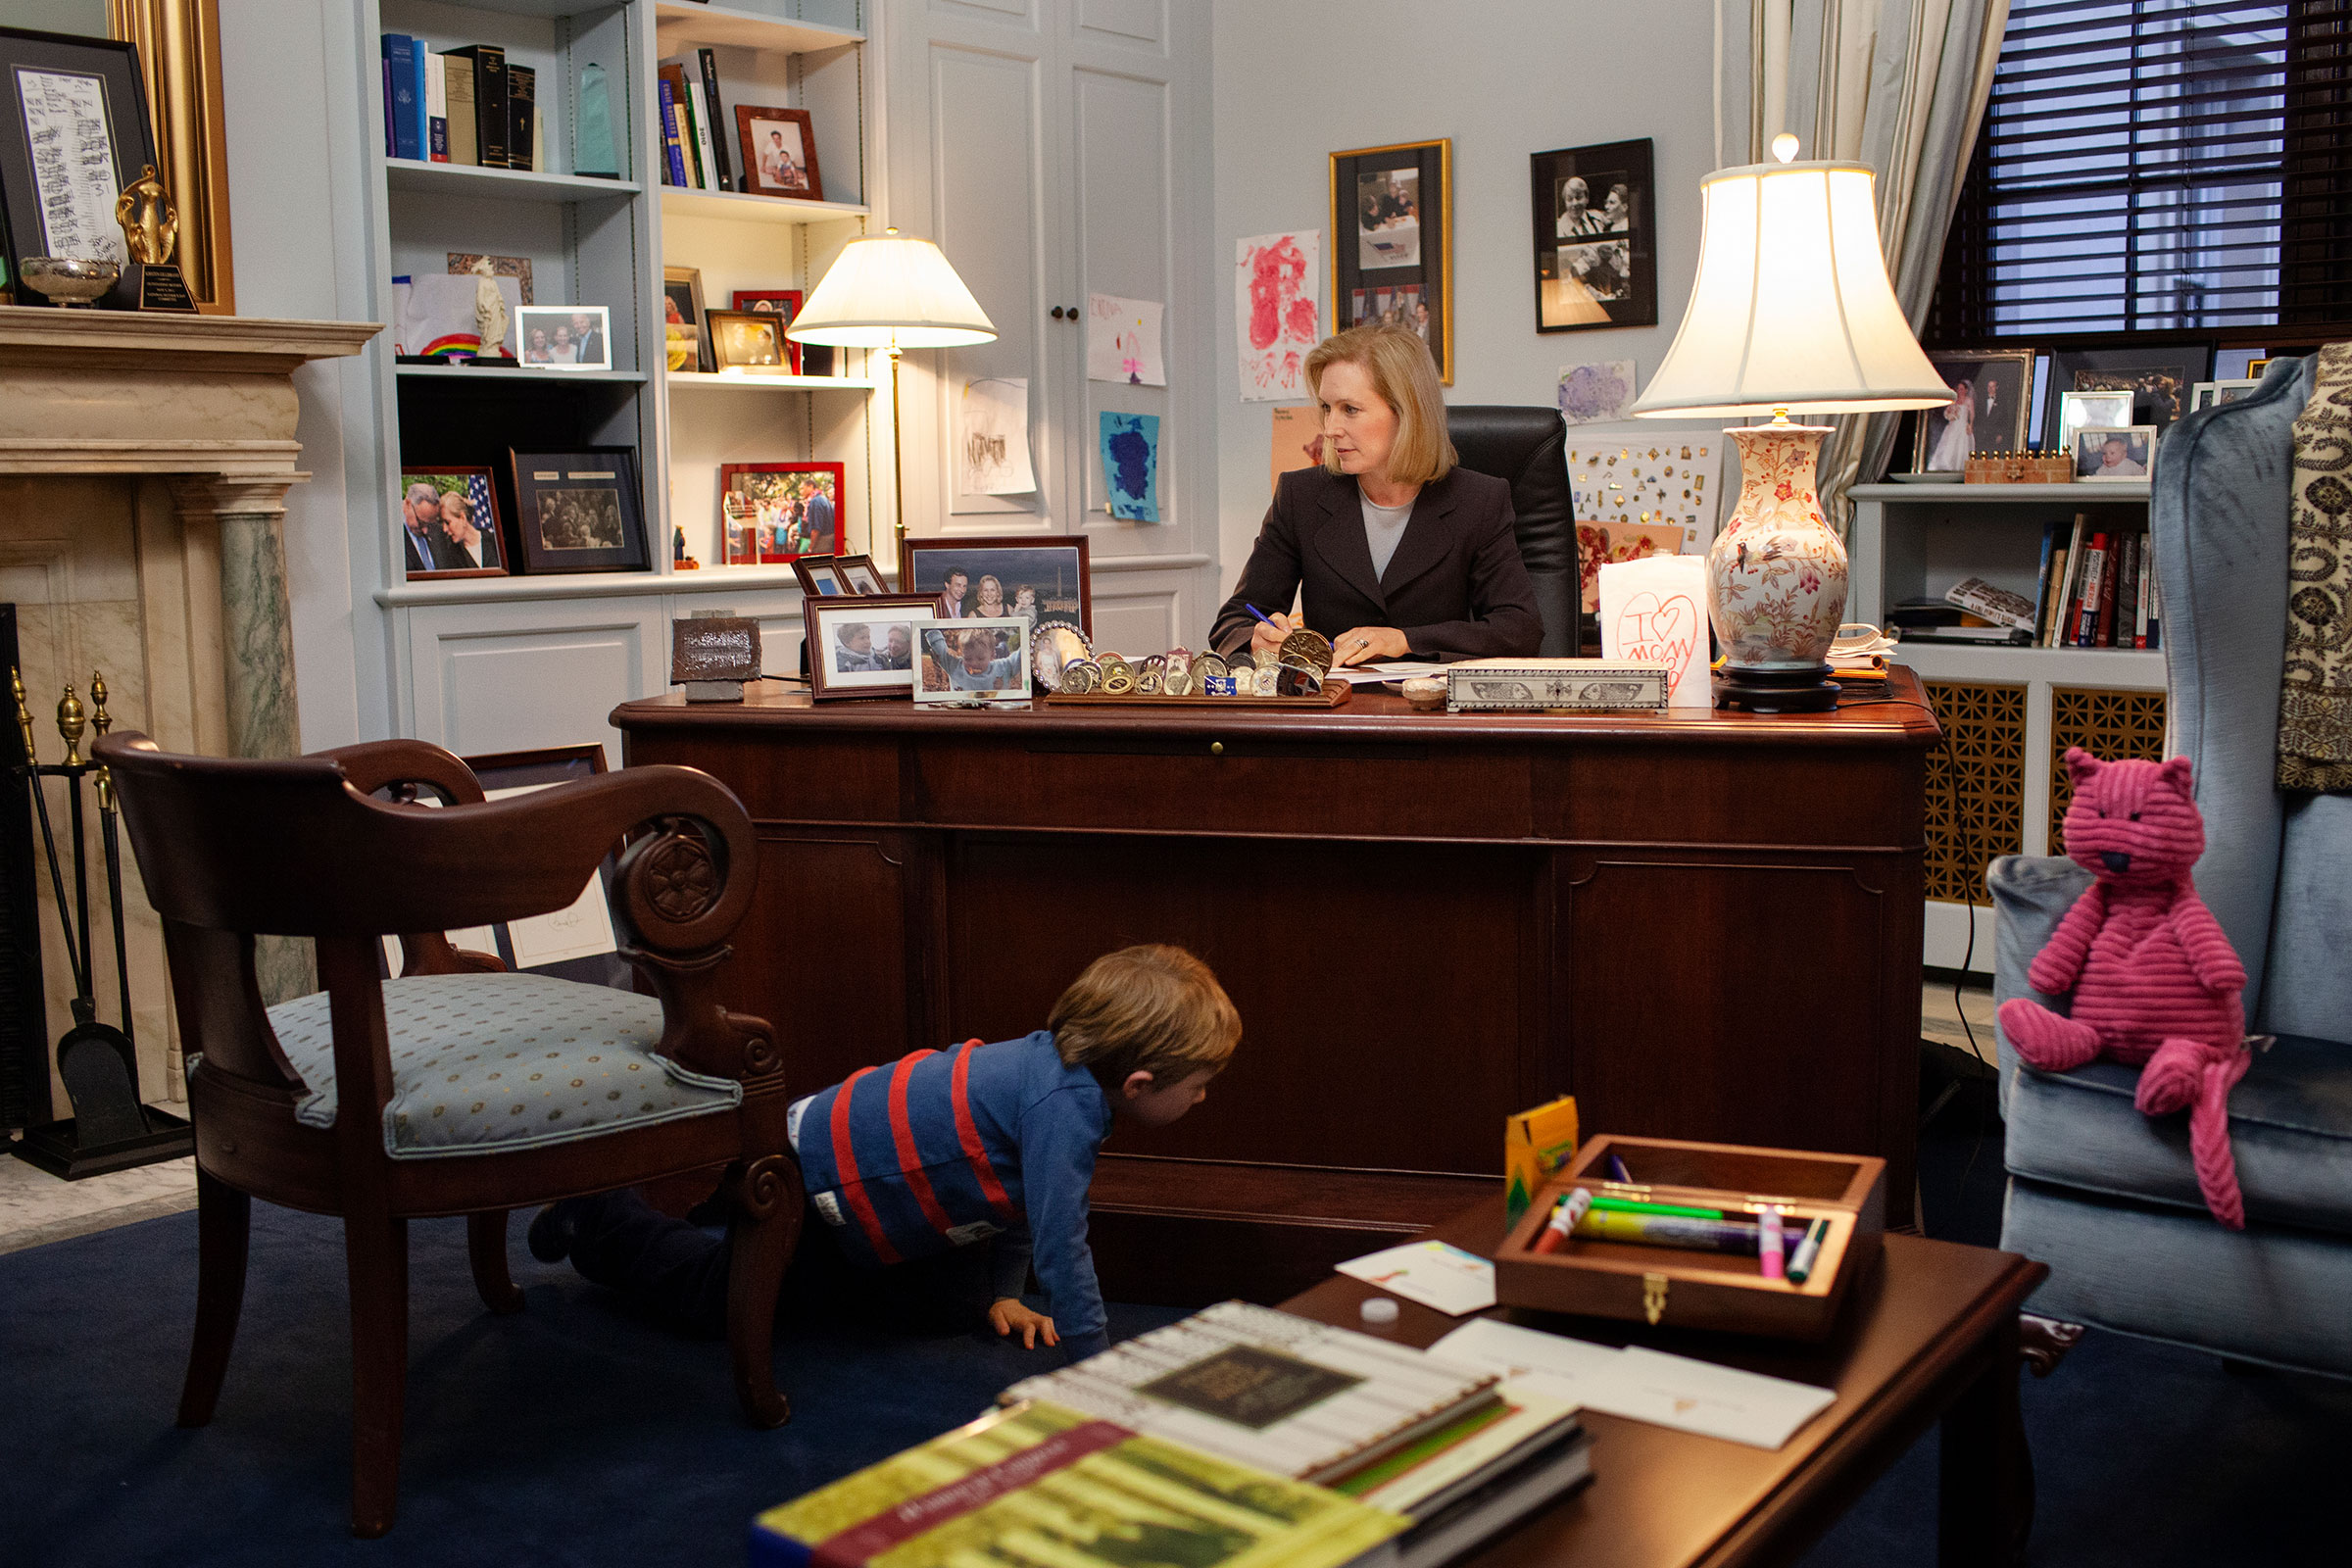 Gillibrand, pictured in her Senate office in 2013, the same year she introduced the FAMILY Act to the Senate (Lauren Lancaster)